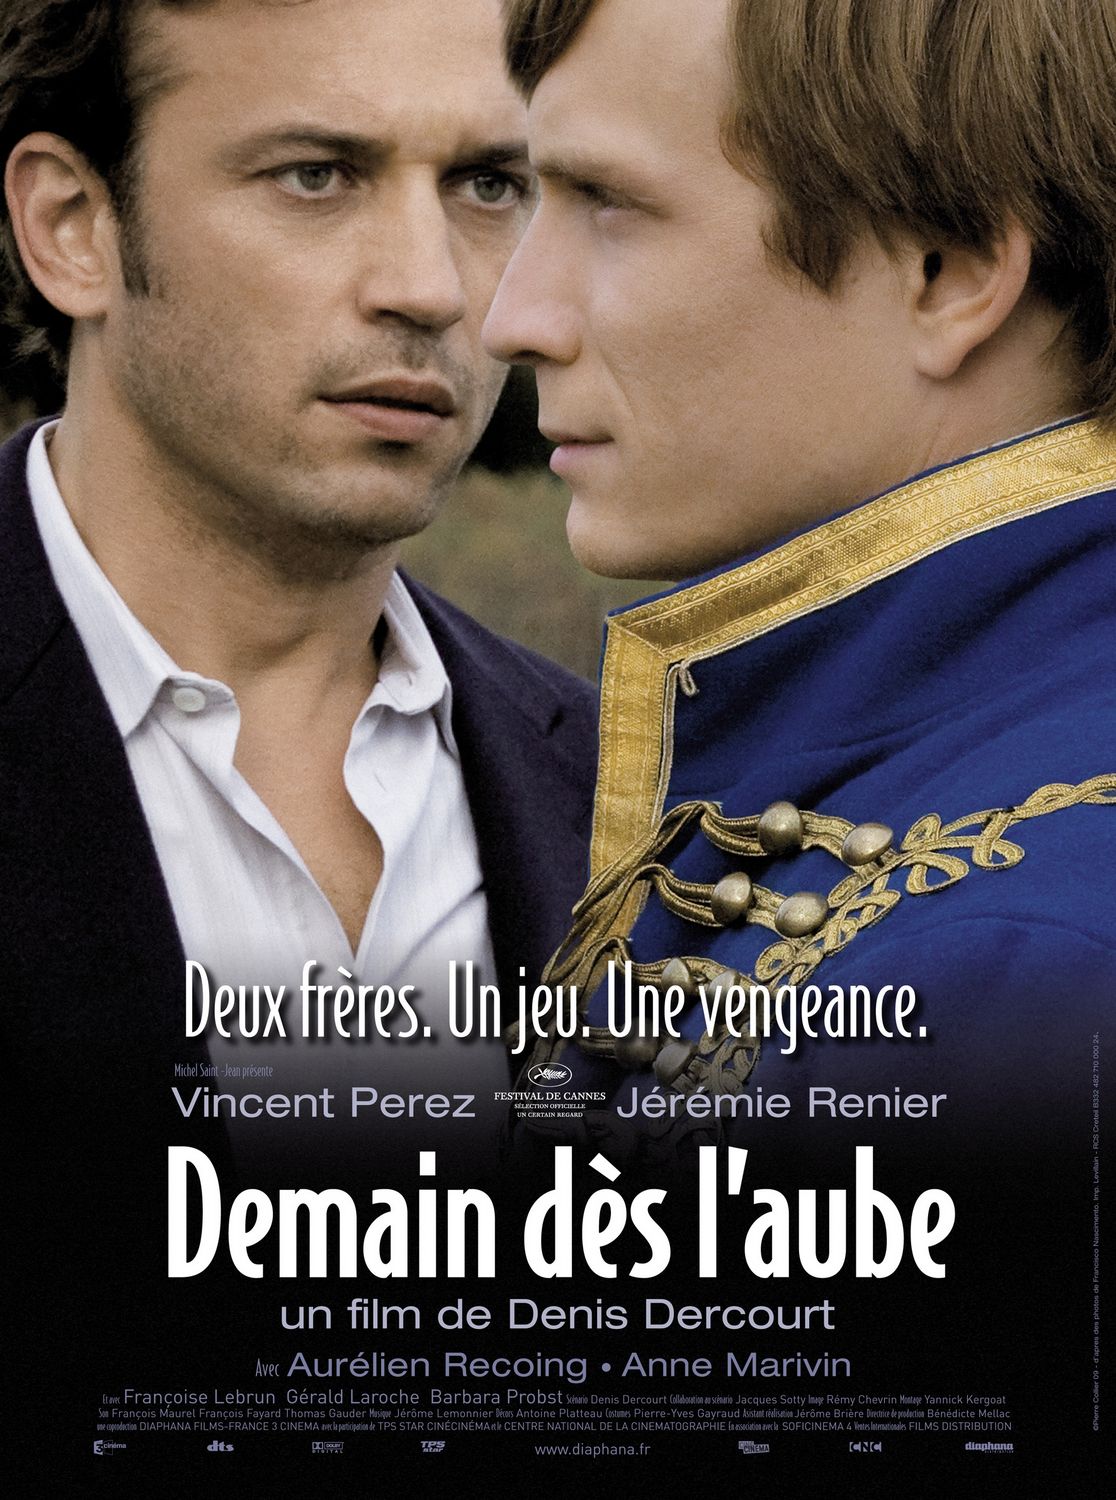 Extra Large Movie Poster Image for Demain dès l'aube 